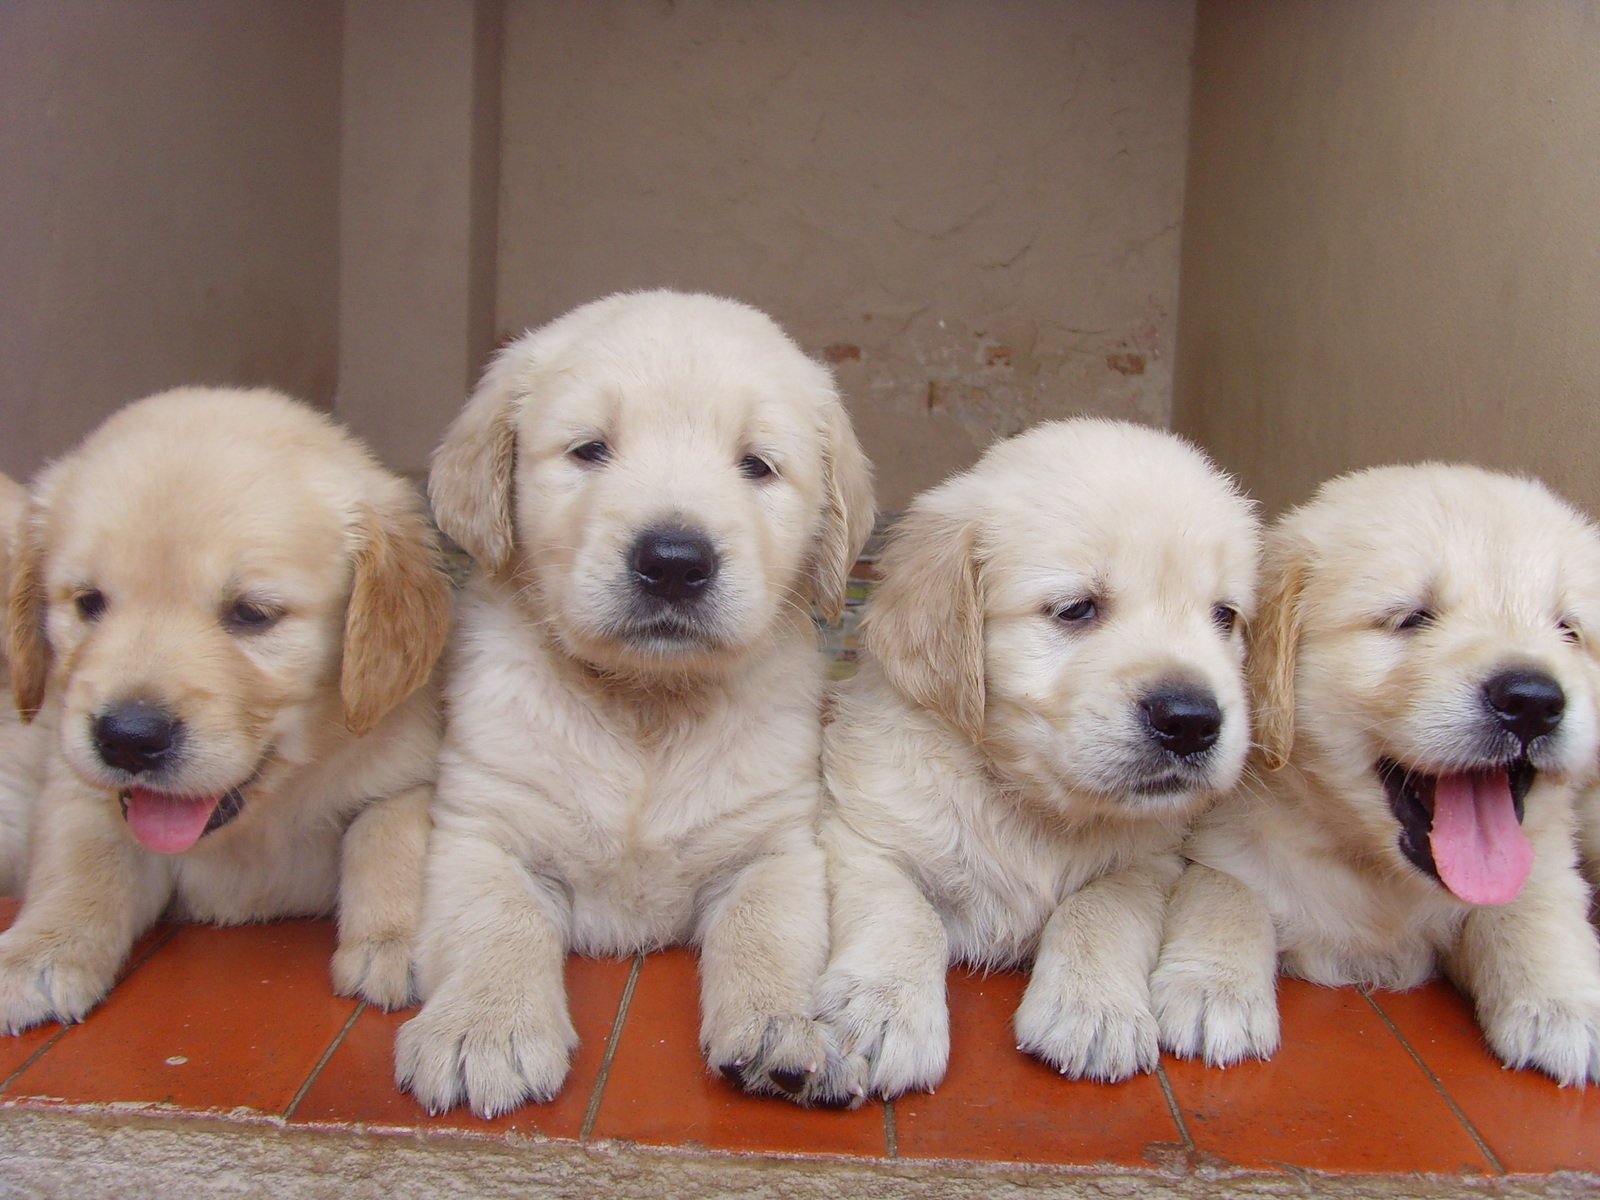 a few puppies sitting together and resting on the ground